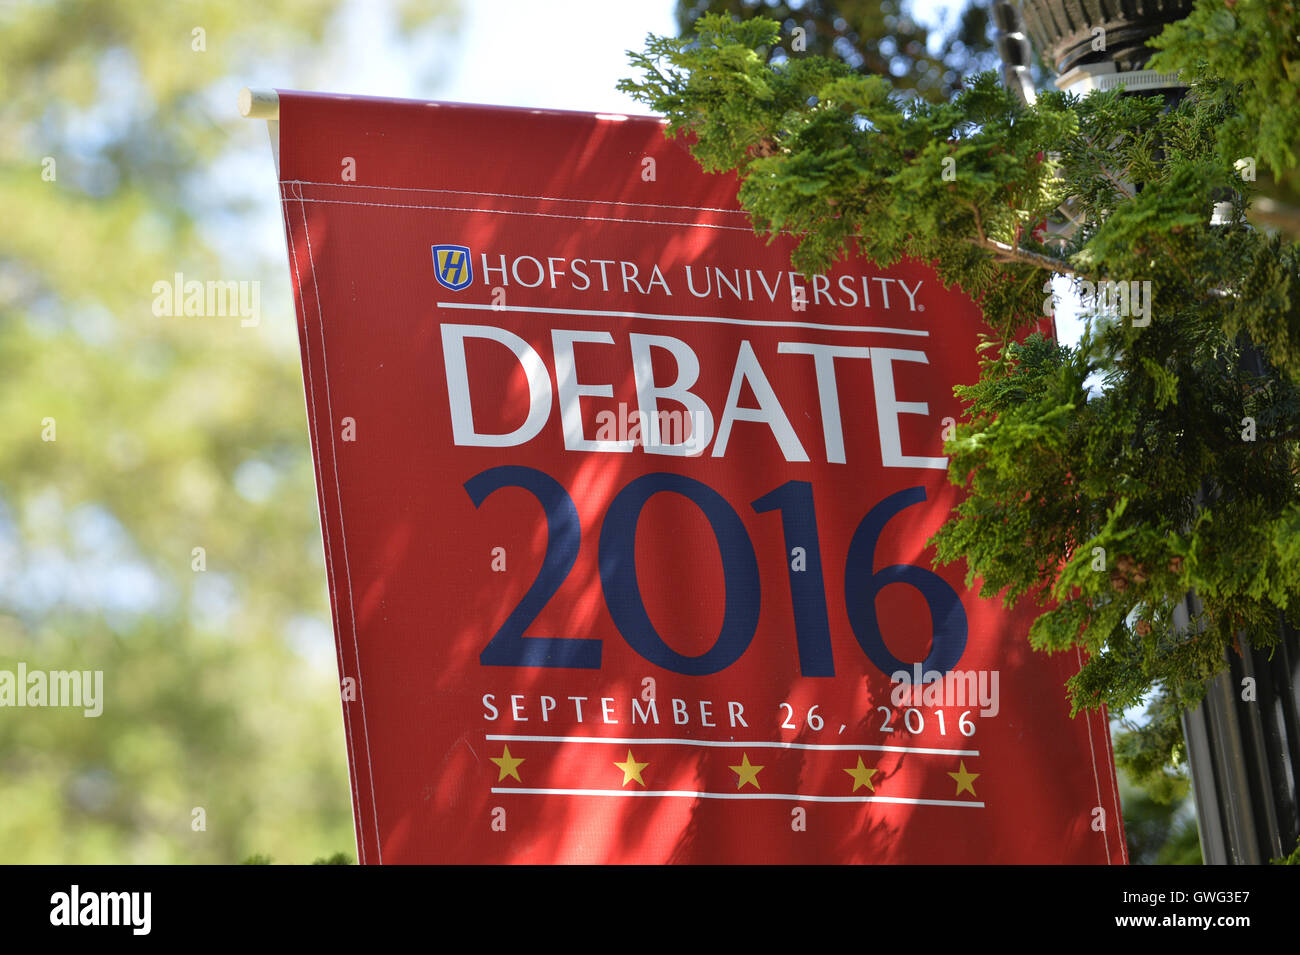 Hempstead, New York, USA. 13th Sep, 2016. Hofstra University Debate 2016 banner, in patriotic red white and blue, is one of many displayed on the campus of Hofstra University, which will host the first Presidential Debate, between H.R. Clinton and D. J. Trump, scheduled for later that month on September 26. Hofstra is first university ever selected for 3 consecutive U.S. presidential debates. © Ann Parry/ZUMA Wire/Alamy Live News Stock Photo